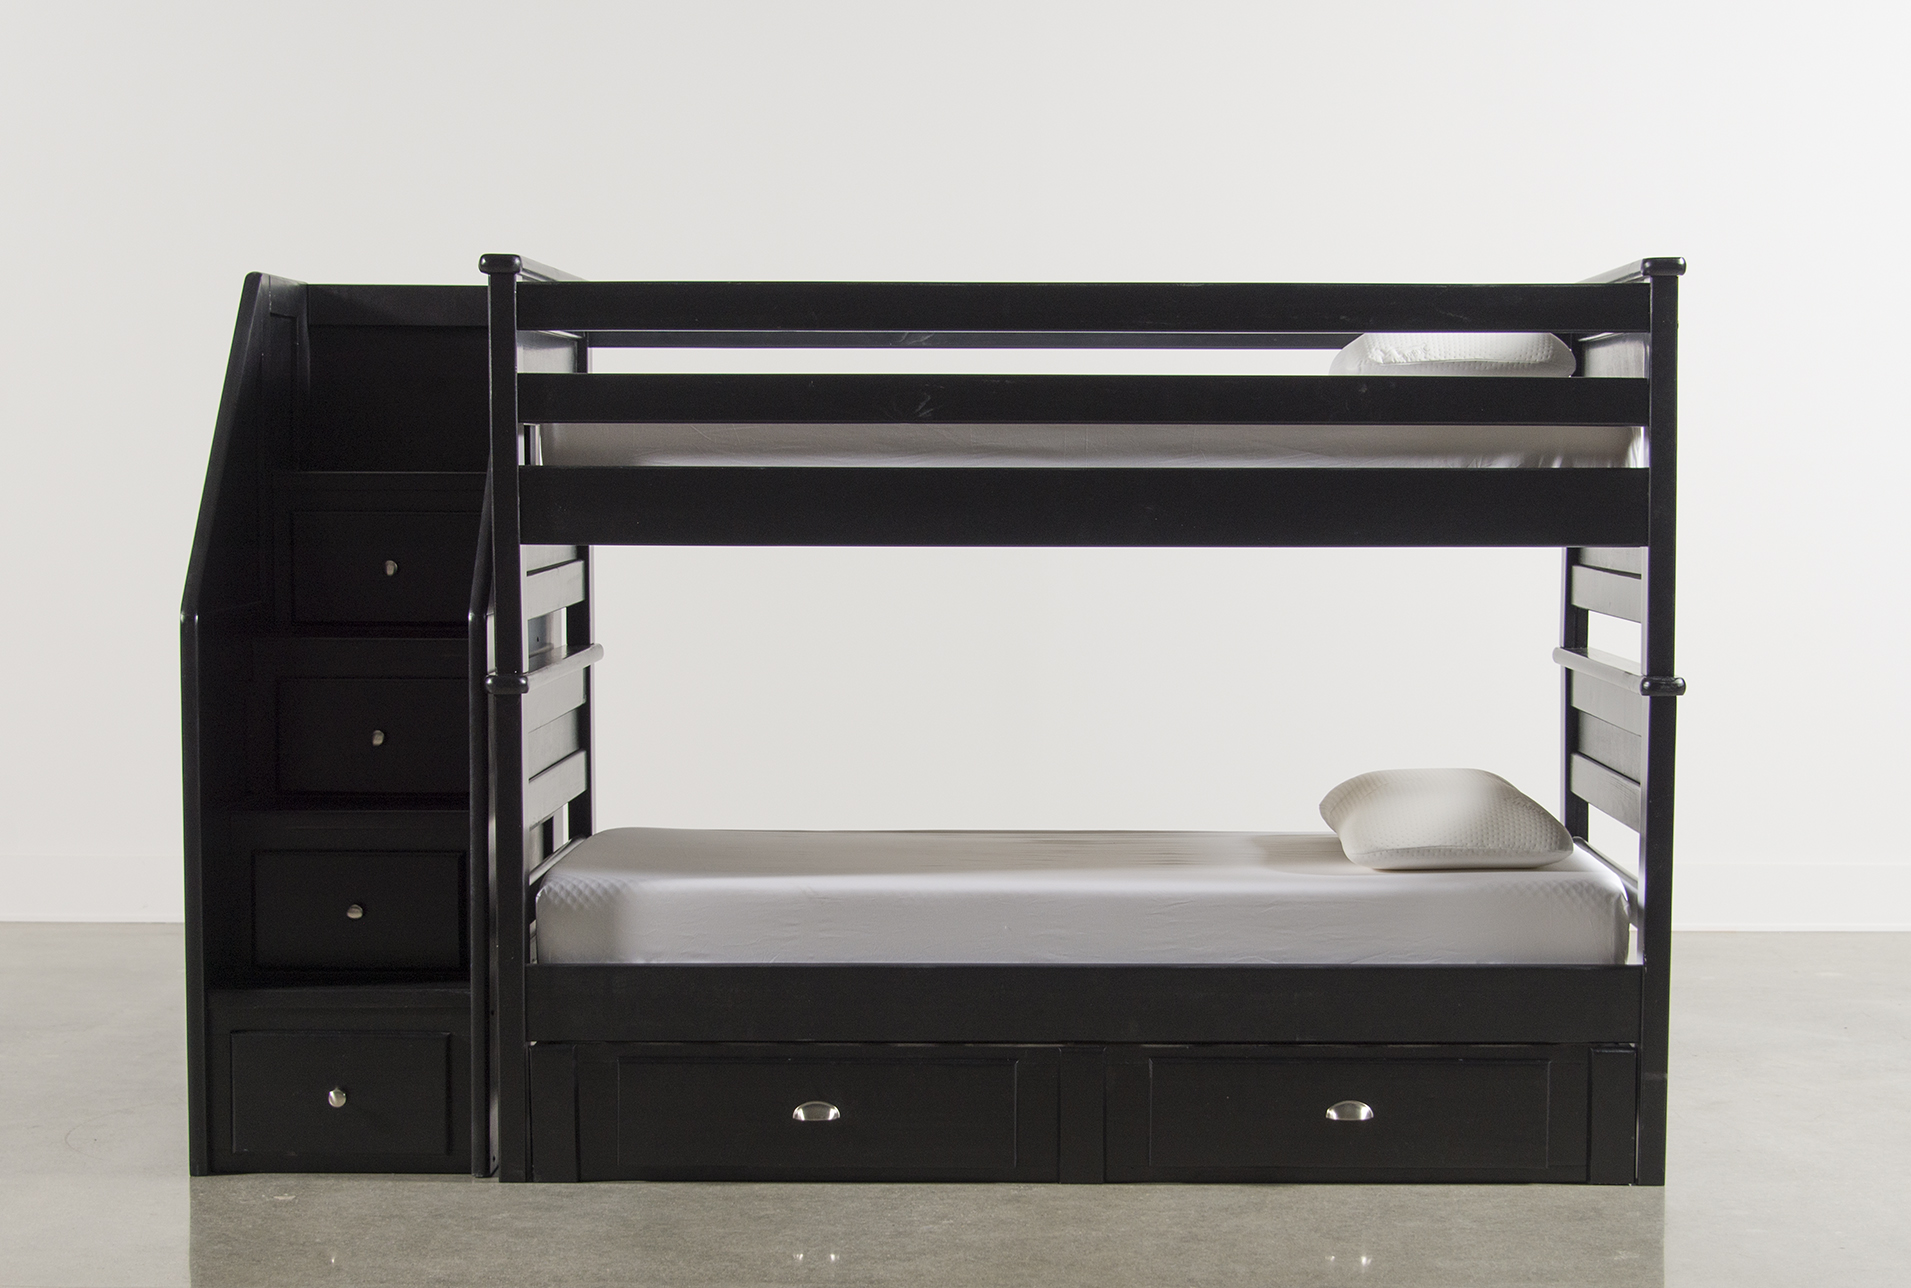 twin bunk bed sets